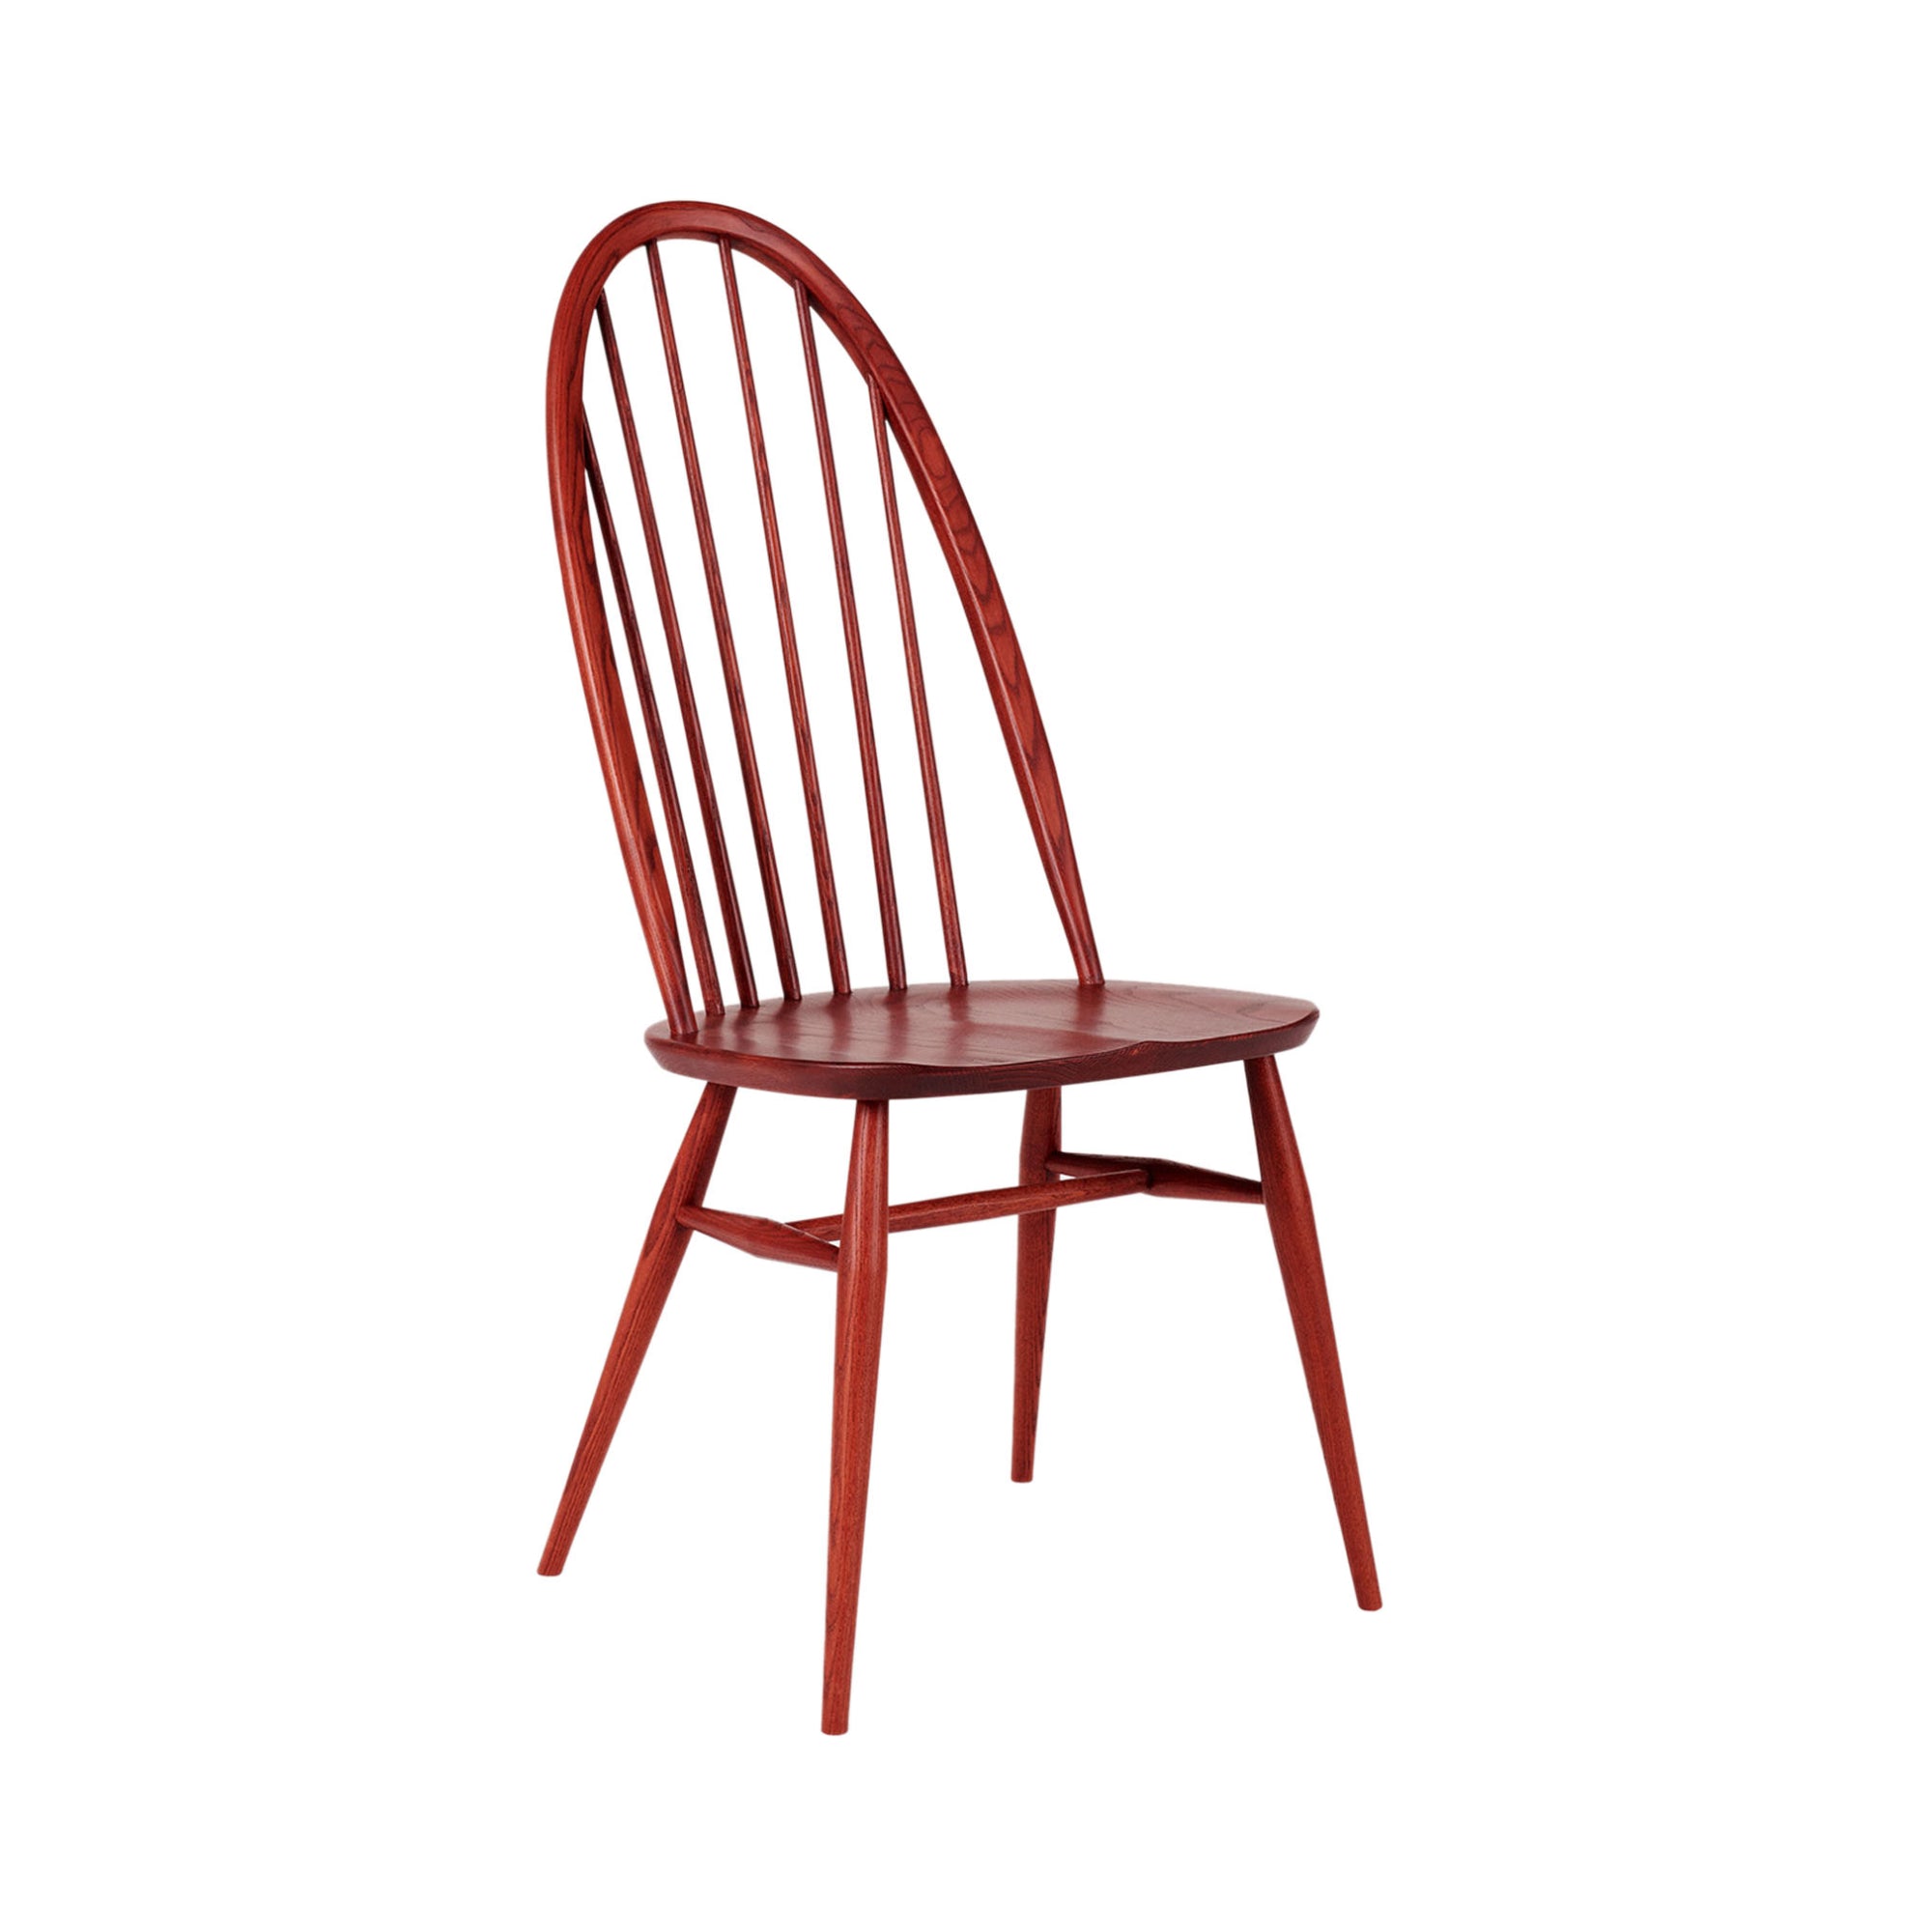 Originals Utility High Back Chair: Stained Vintage Red